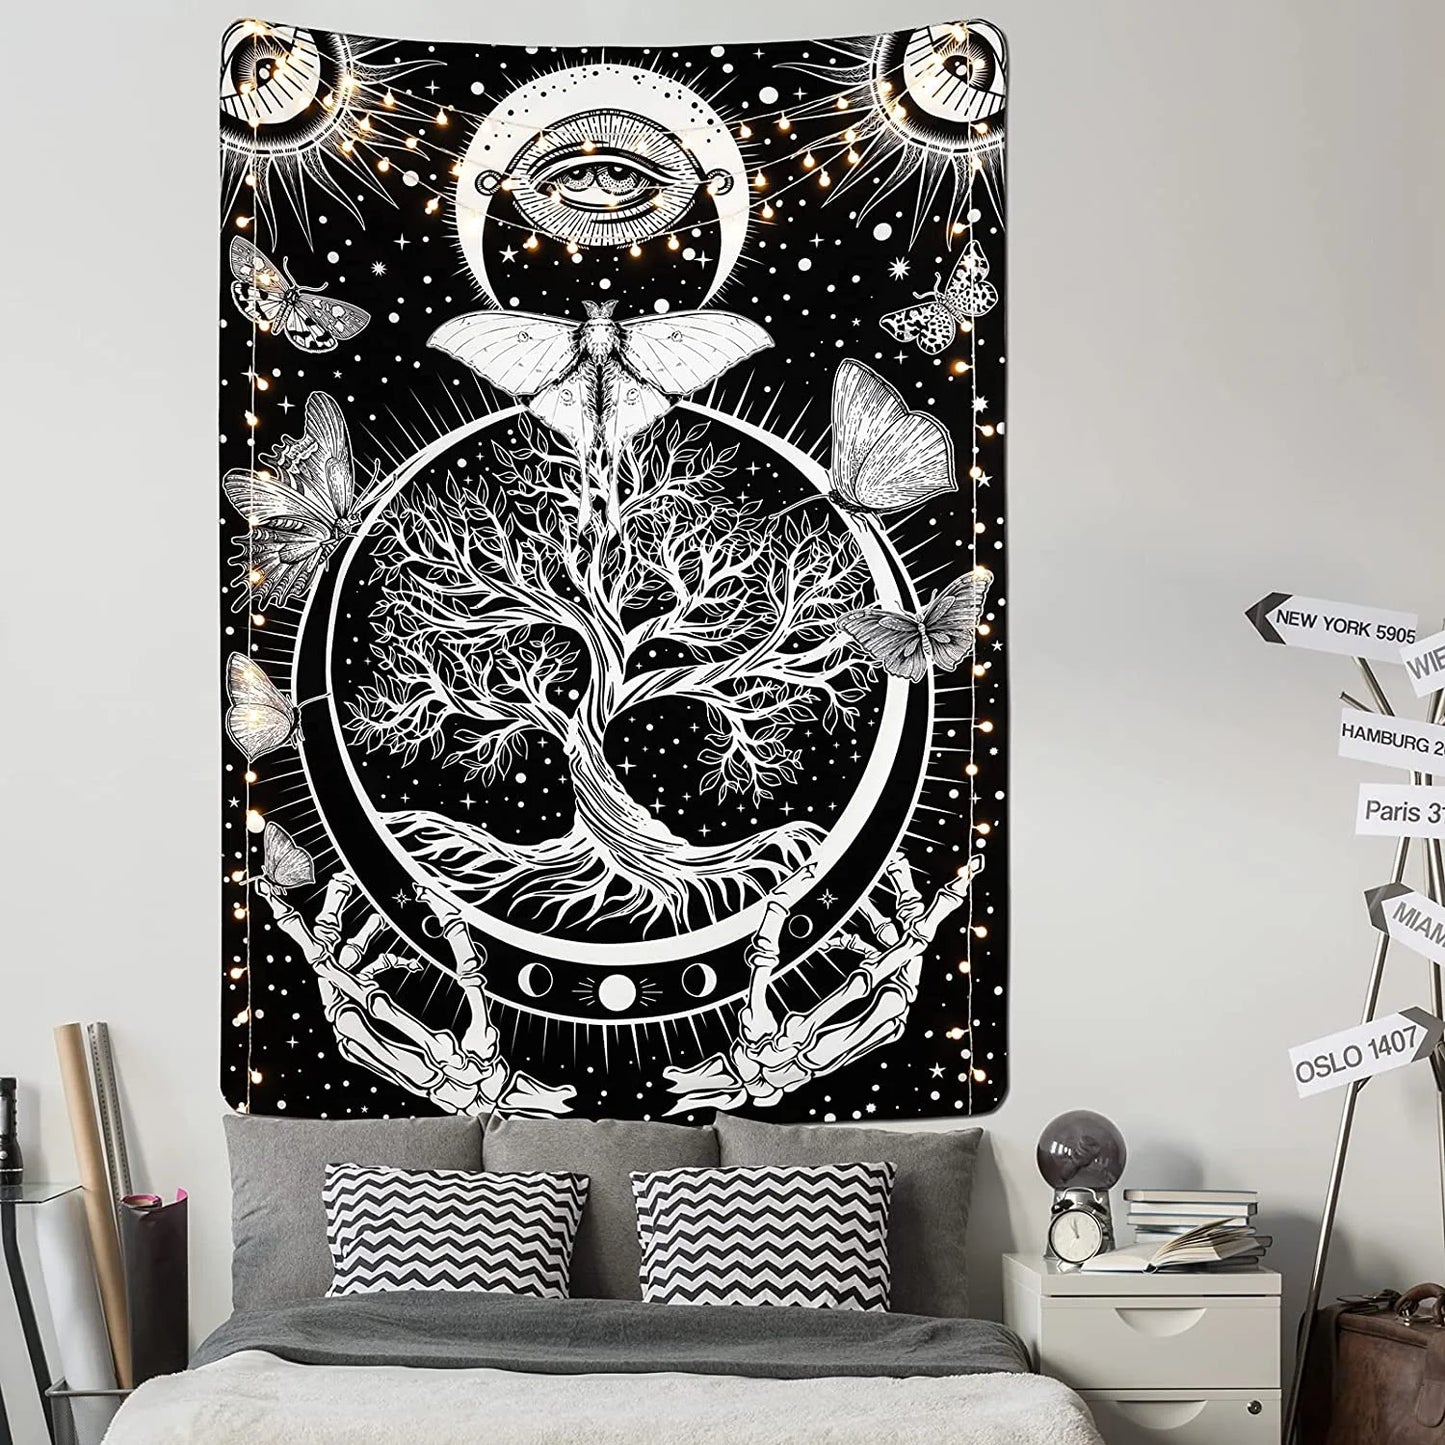 Witchcraft Tapestry Black and White Snake Wall Decoration Moon Star Tarot Gothic Aesthetic Art Hanging for Room Home Decor